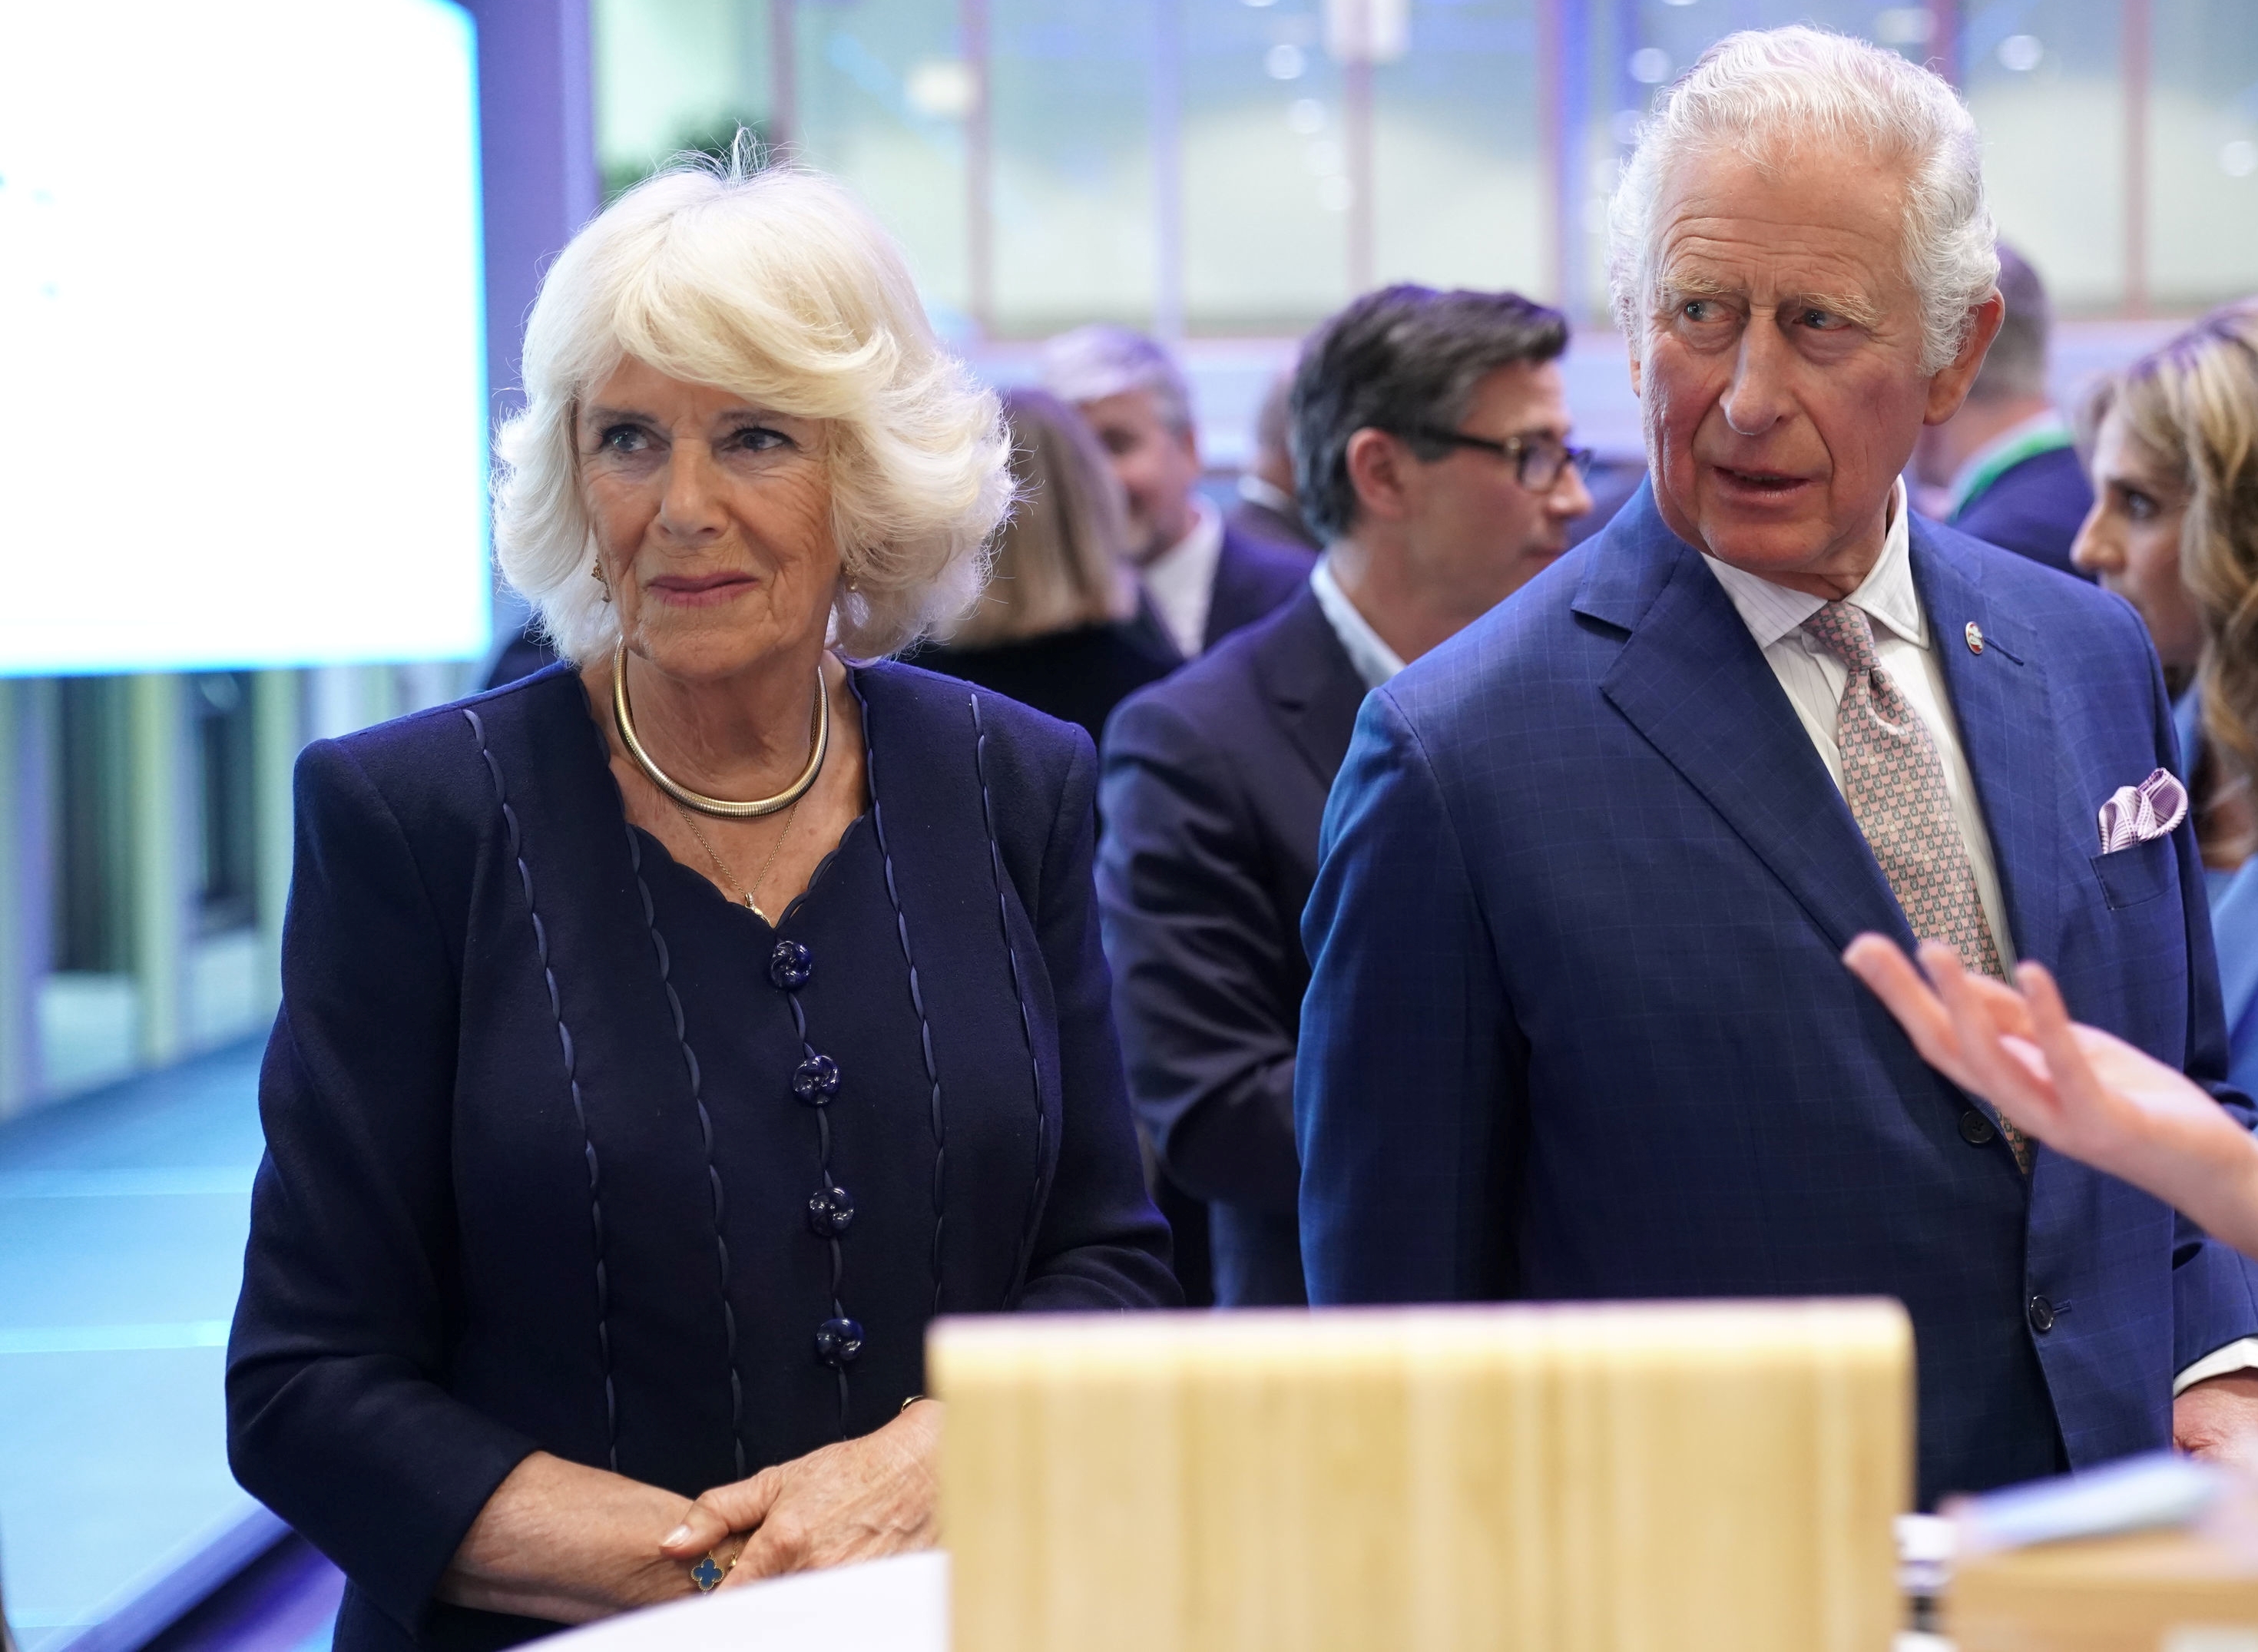 Prince Charles and his bride Camilla Parker Bowles pictured together at an event in North London